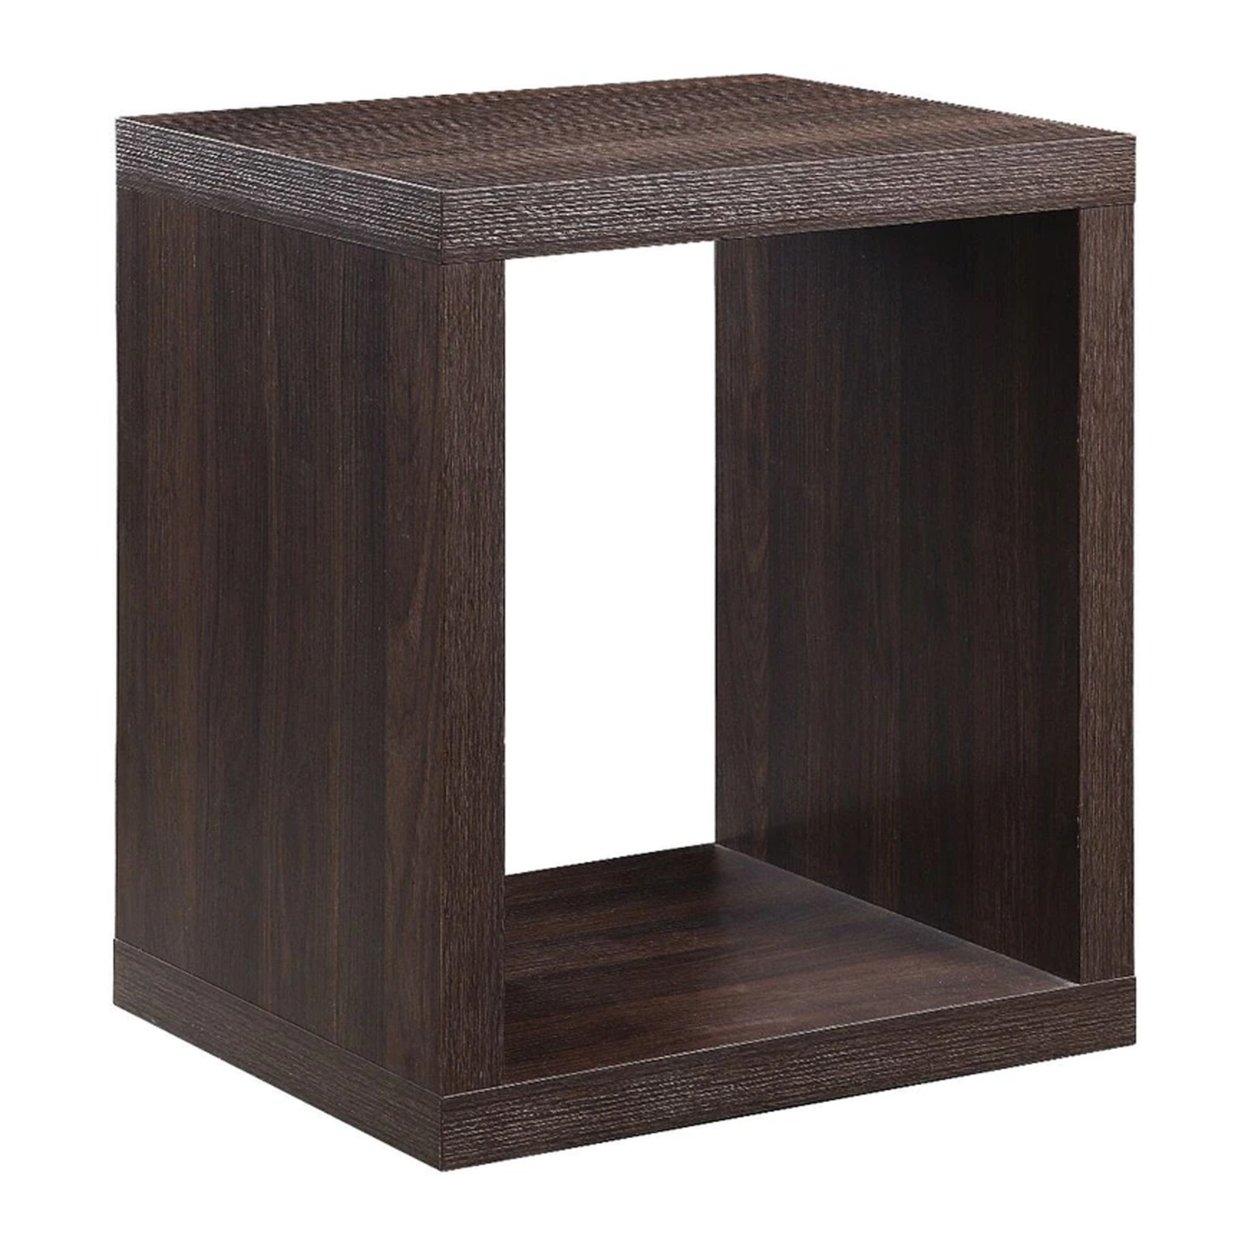 End Table With Wooden Frame And Open Shelf, Walnut Brown- Saltoro Sherpi